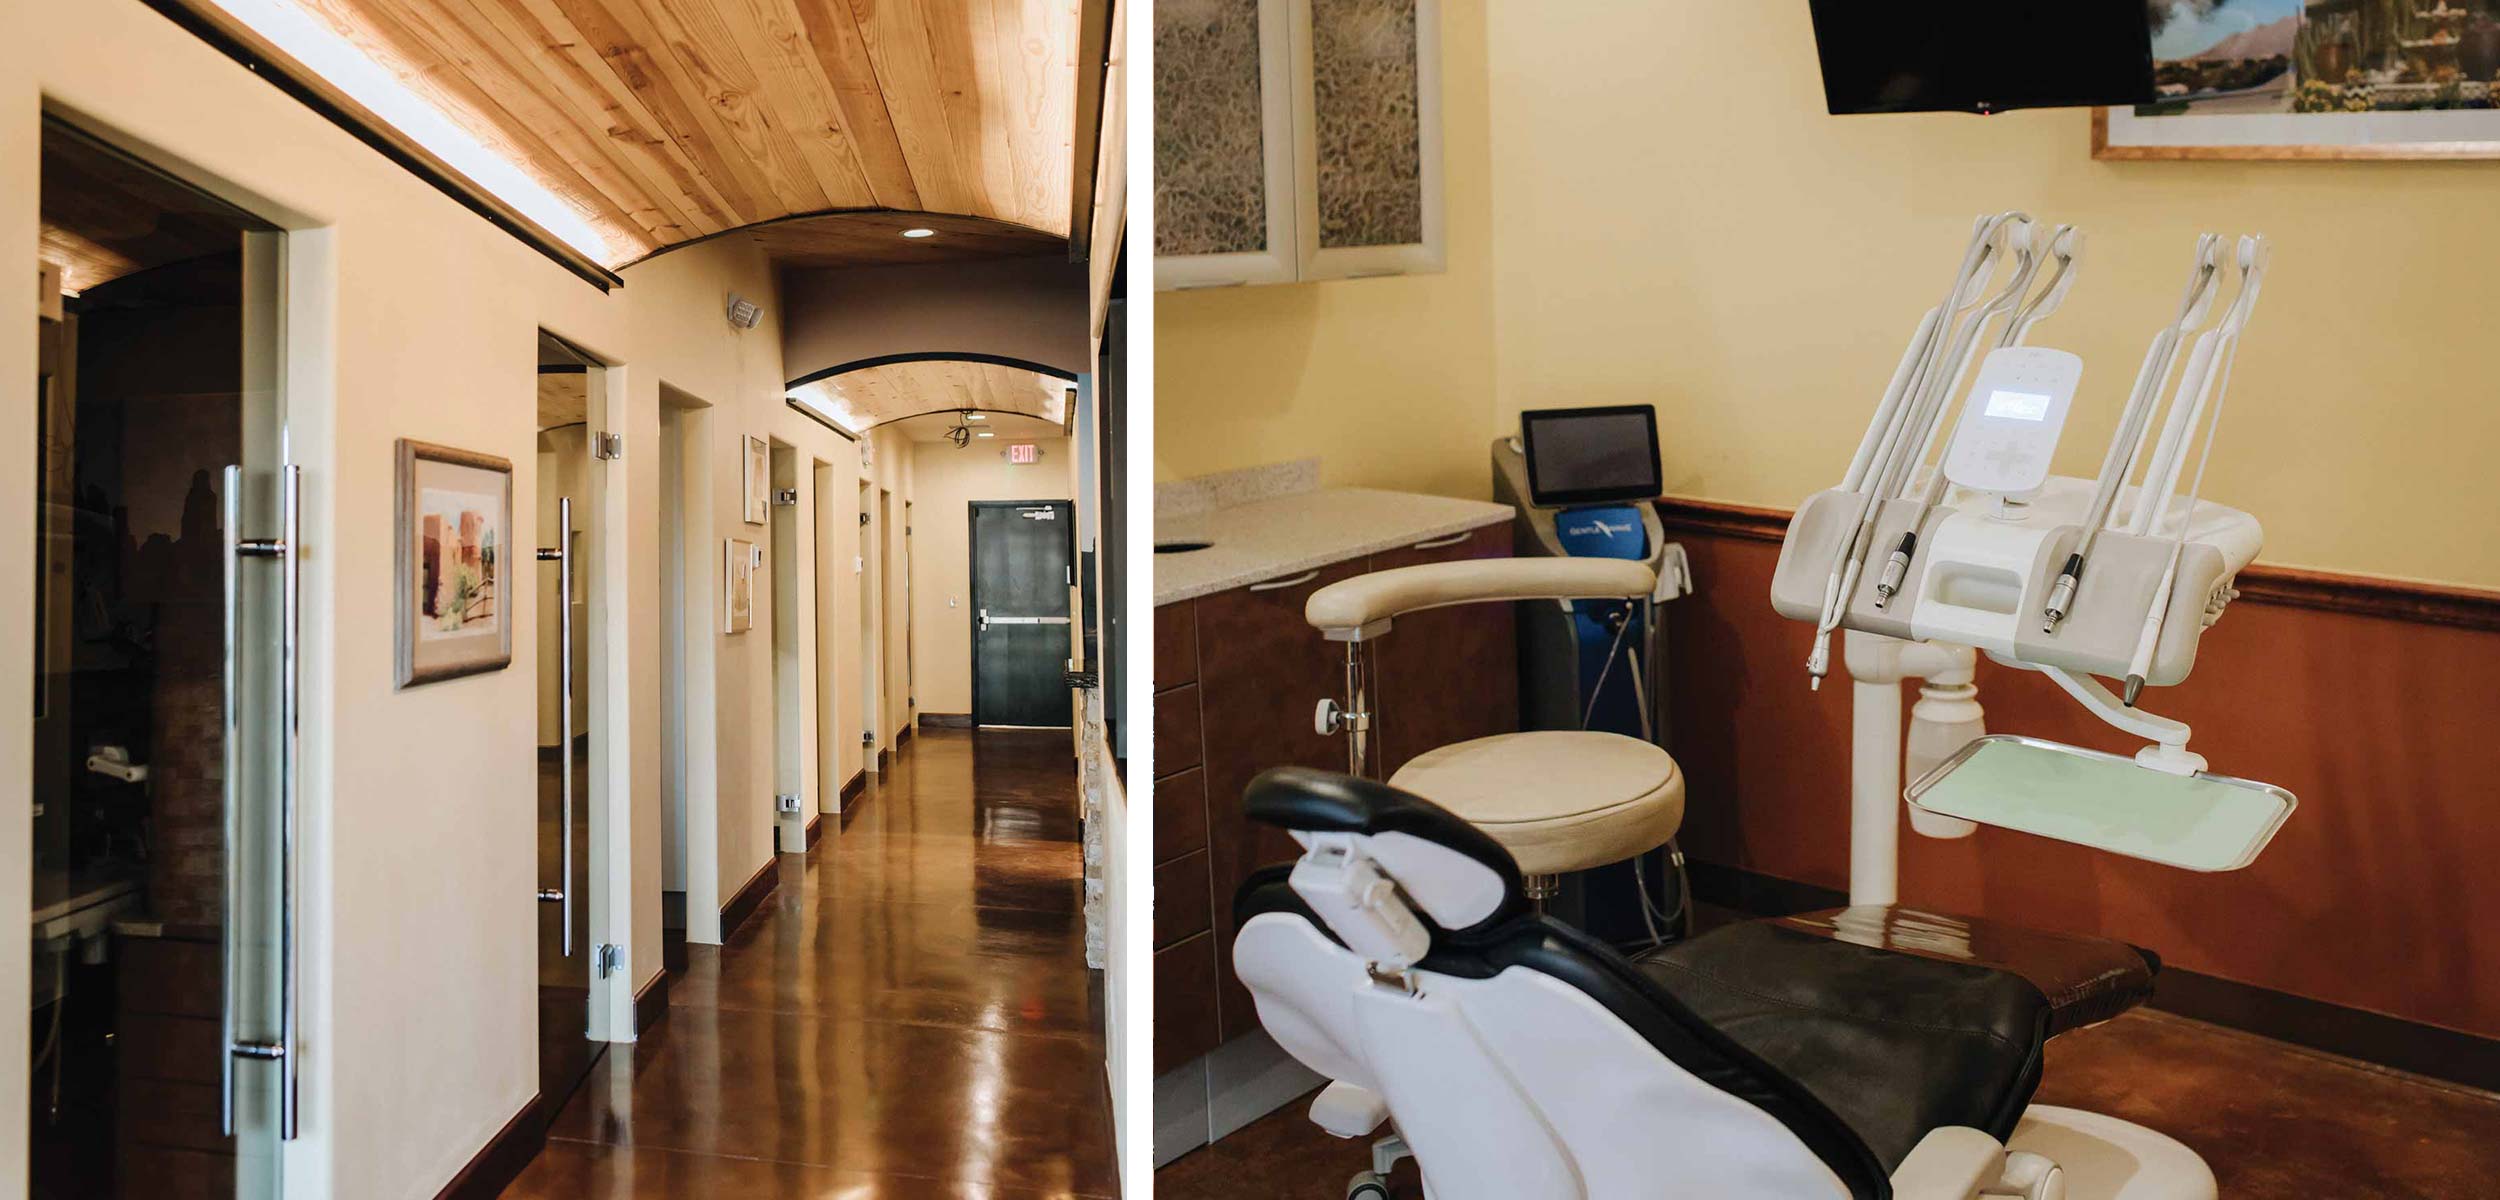 Left: Curved arches and warmly lit wood carry through the hallways as patients make their way to the operatory rooms. Right: Each operatory is complete with individual heating/cooling vents which run through the ventilation system. The paint colors seen throughout the practice are echoed in the operatories – clay on the ceilings, warm buttery yellow on the top part of the walls, and terra cotta below the wooden char rails.